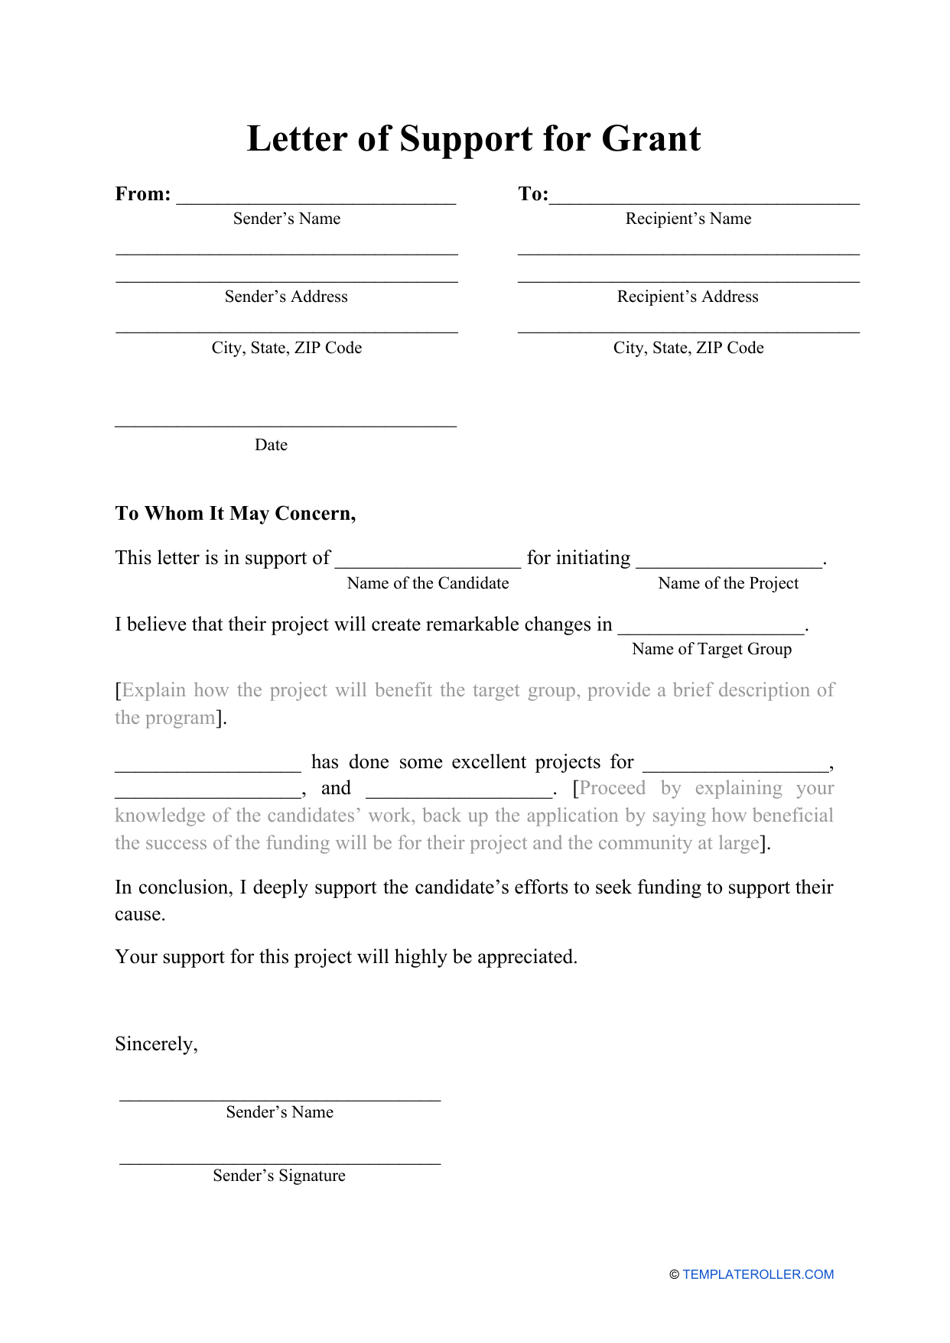 Letter of Support for Grant Template - Templateroller